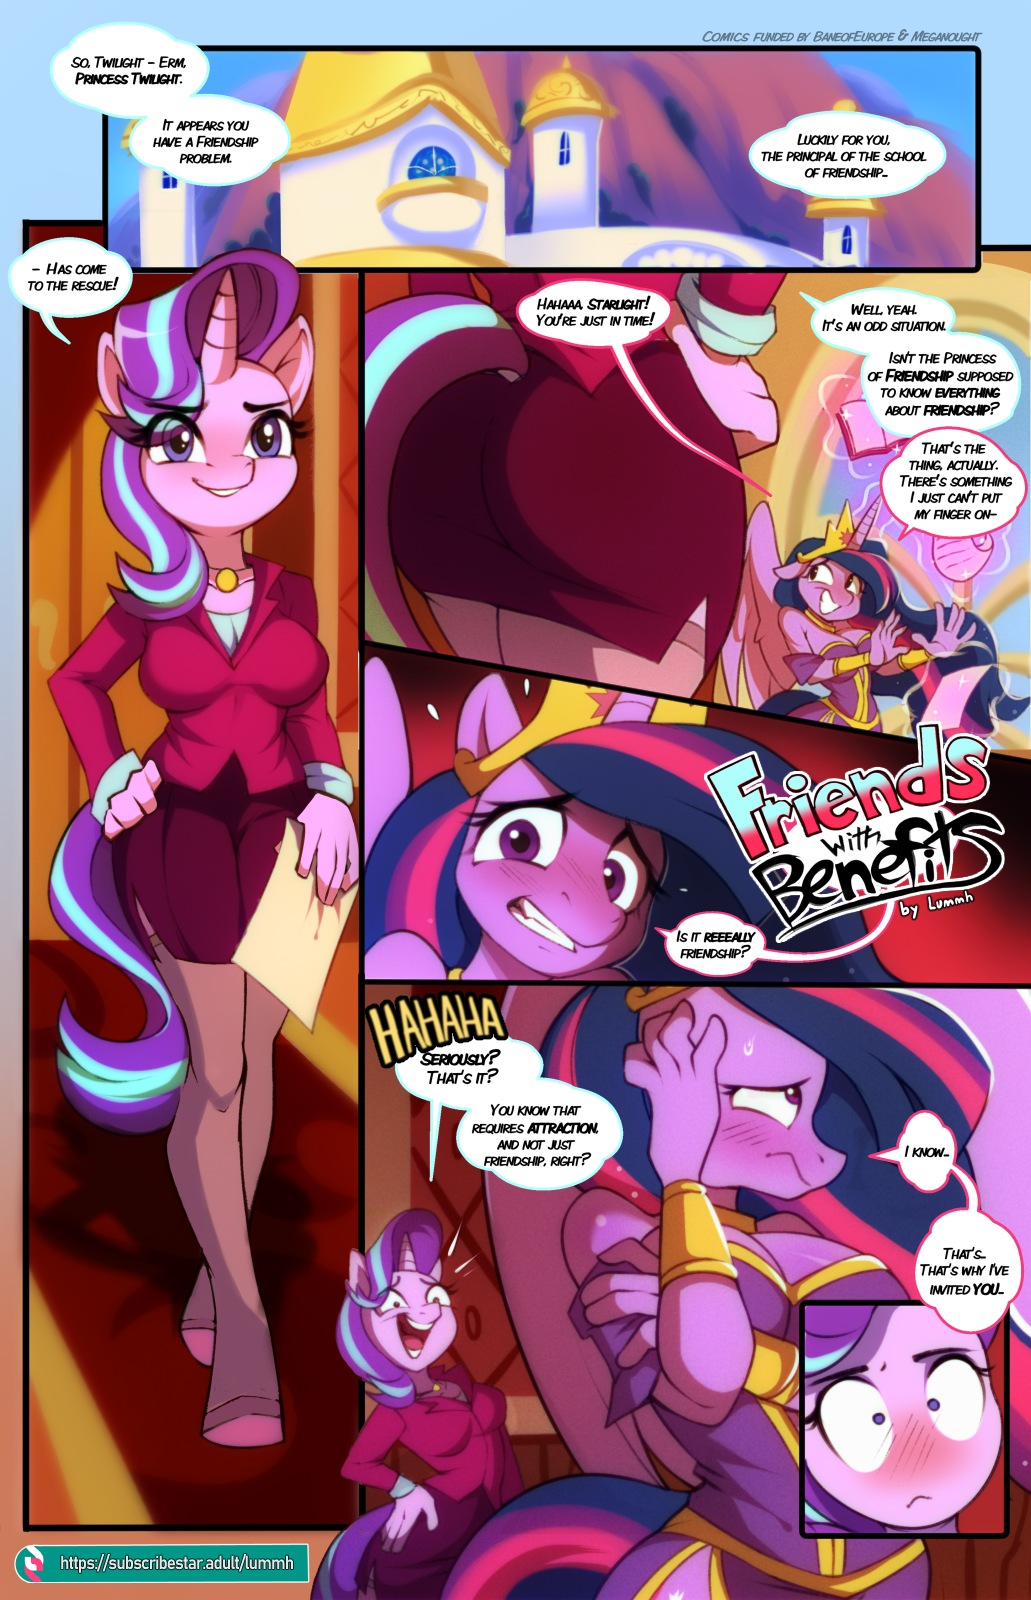 MLP Friendship With Benefits